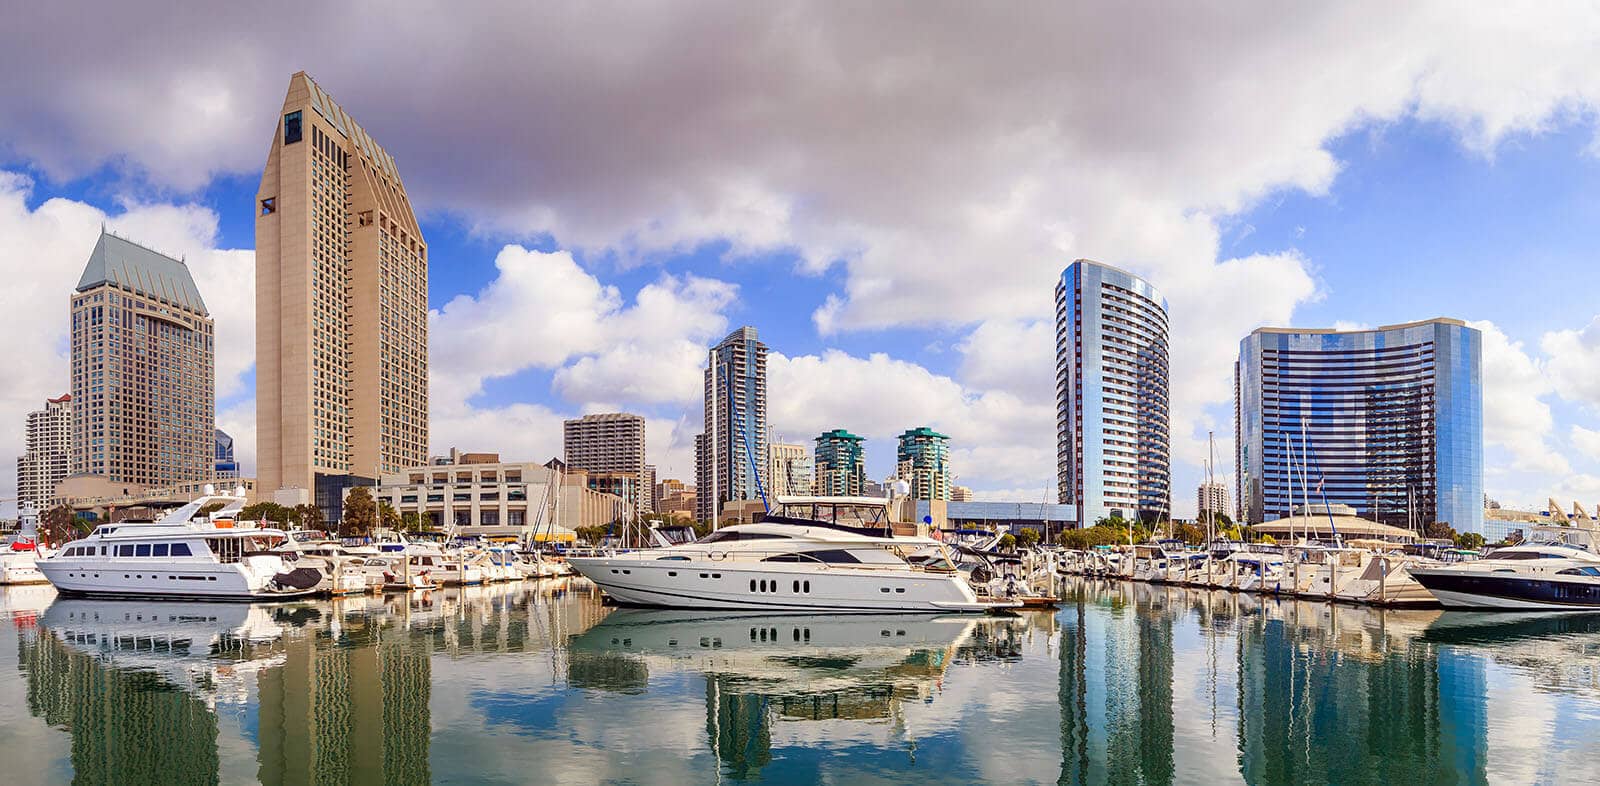 Yatch and Building in San Diego